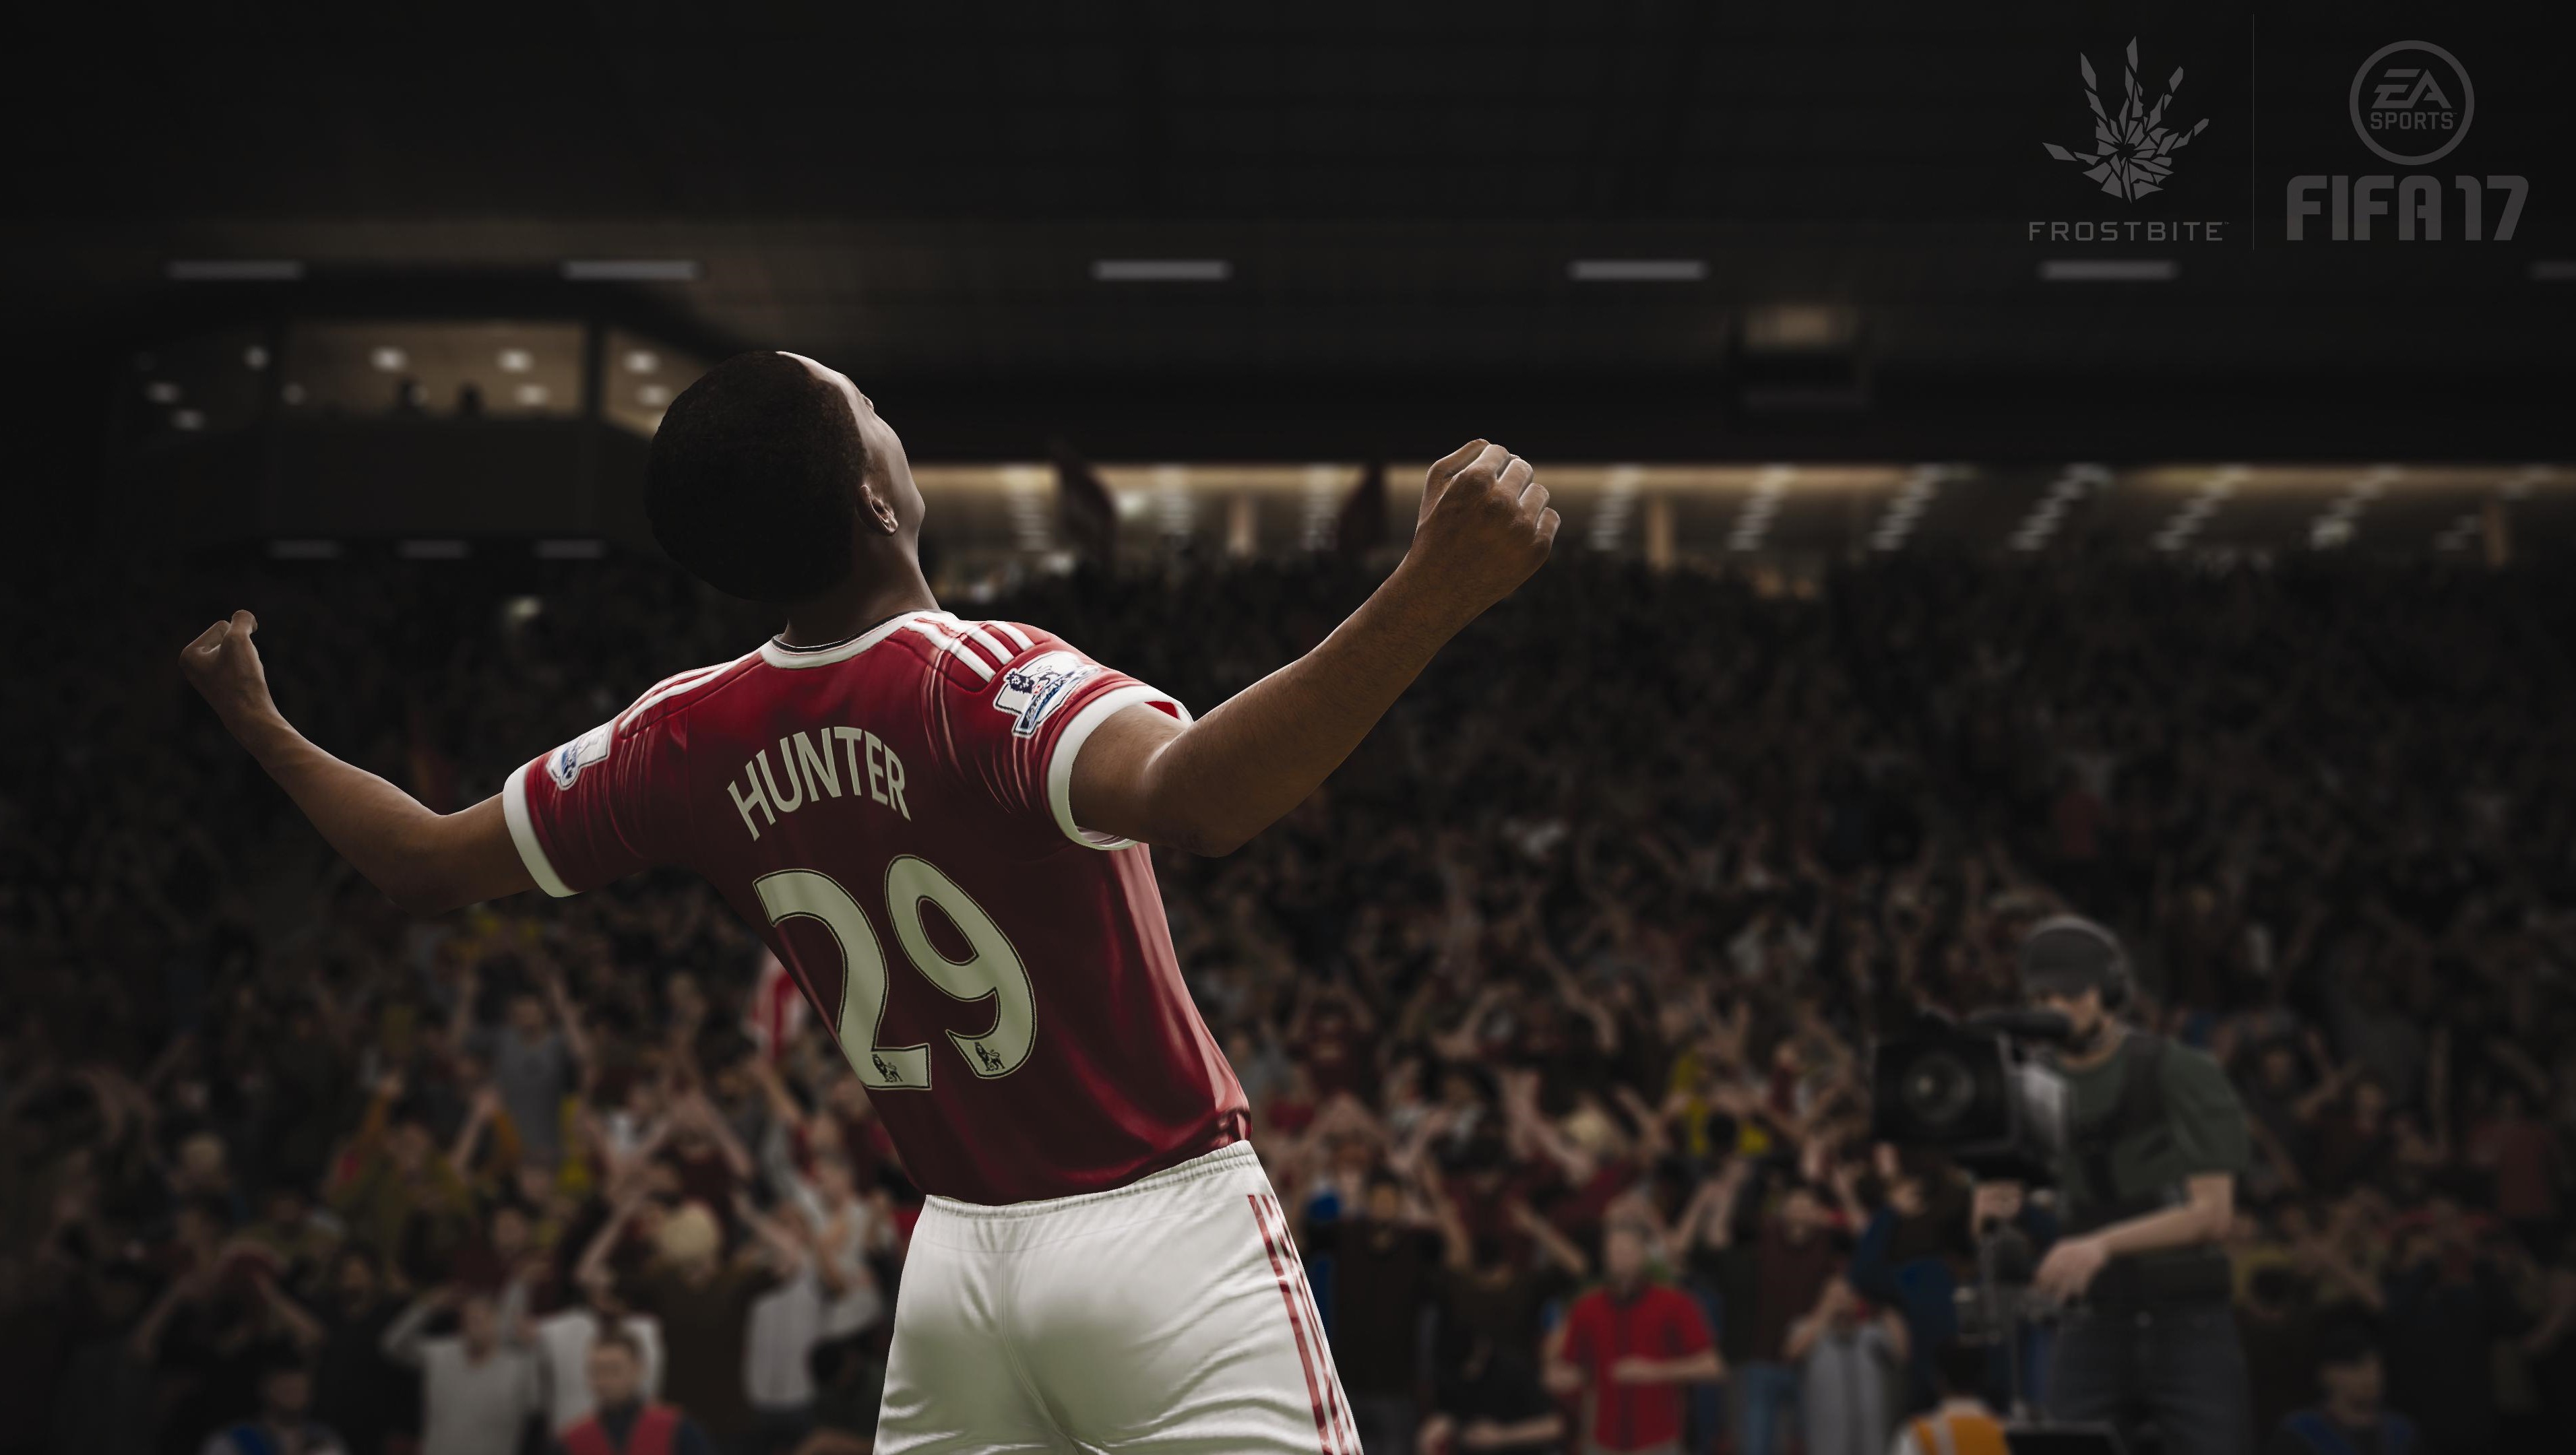 fifa 17 activation product key for pc